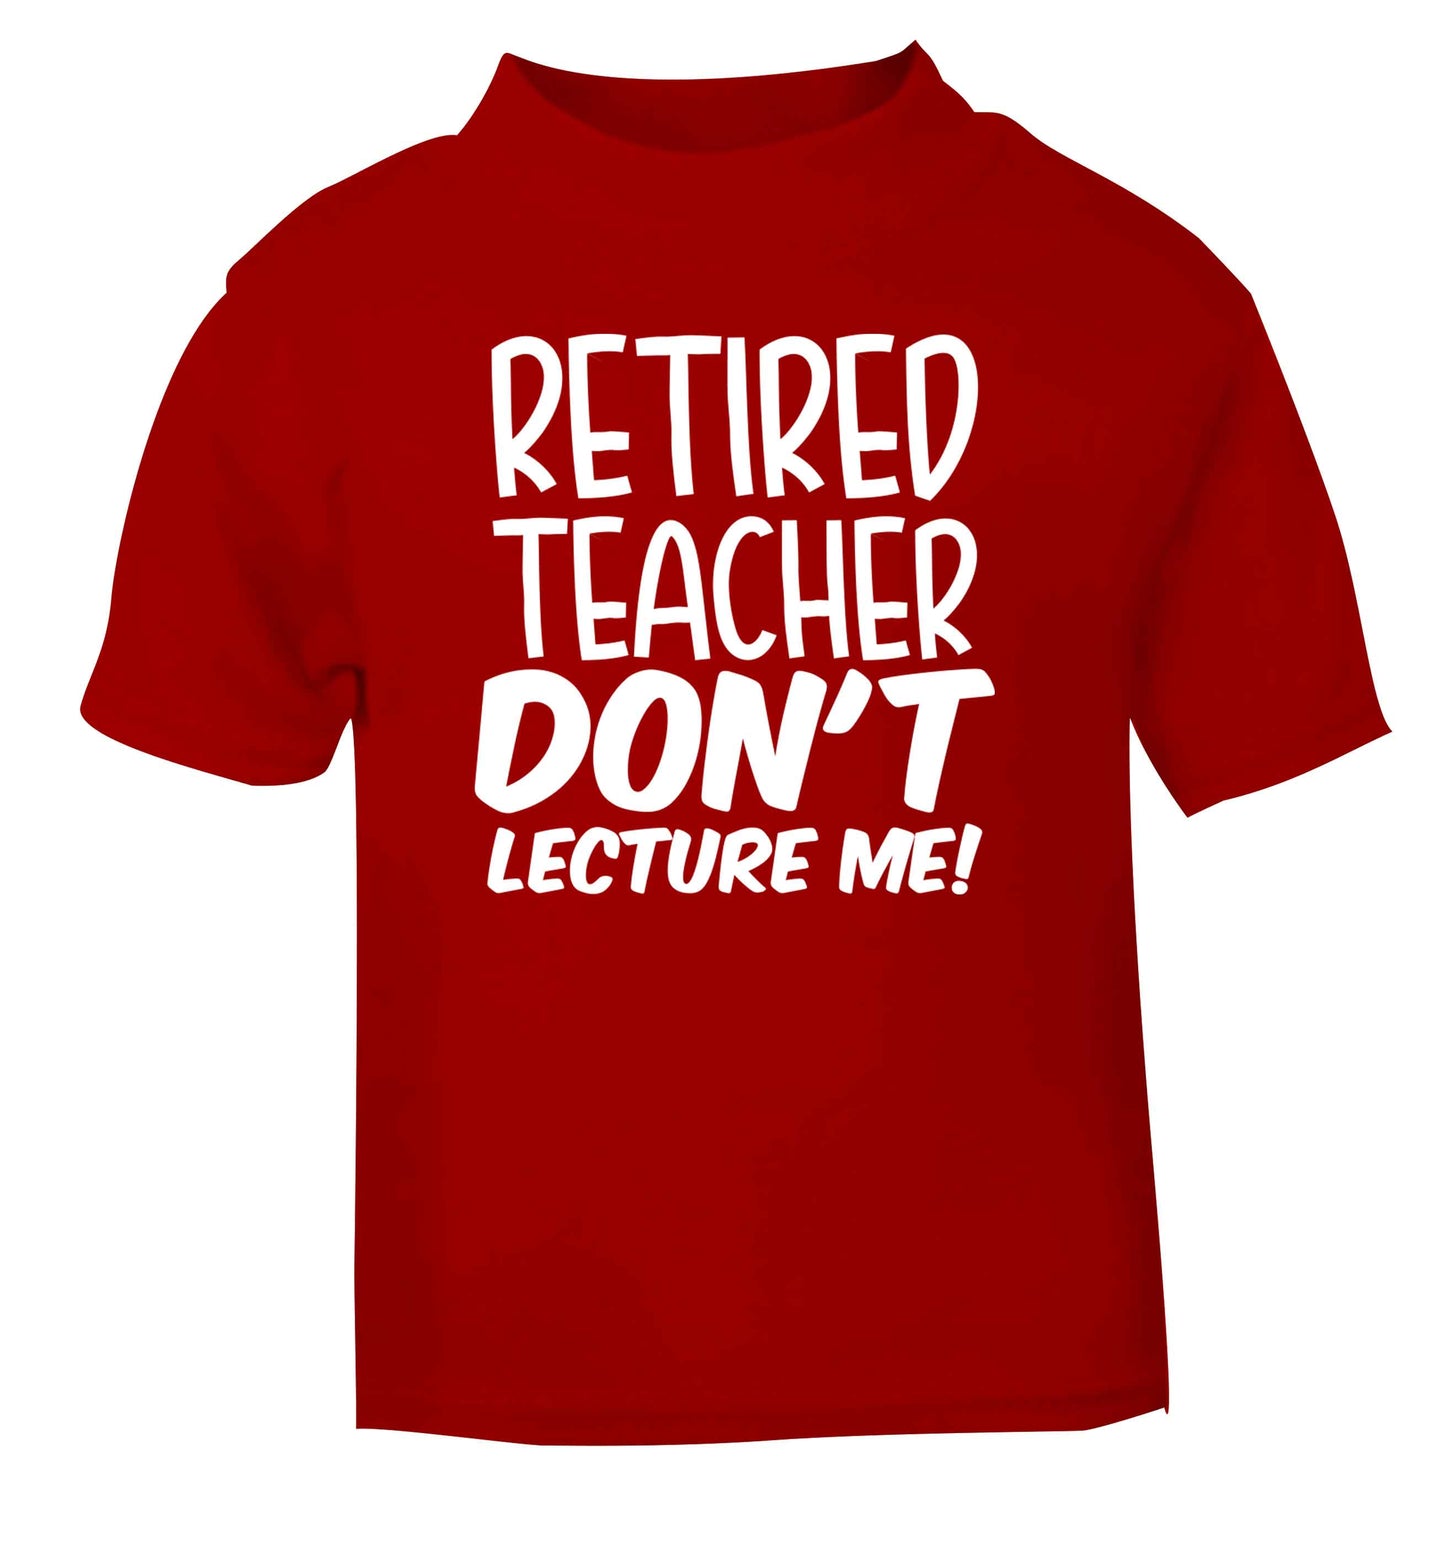 Retired teacher don't lecture me! red Baby Toddler Tshirt 2 Years